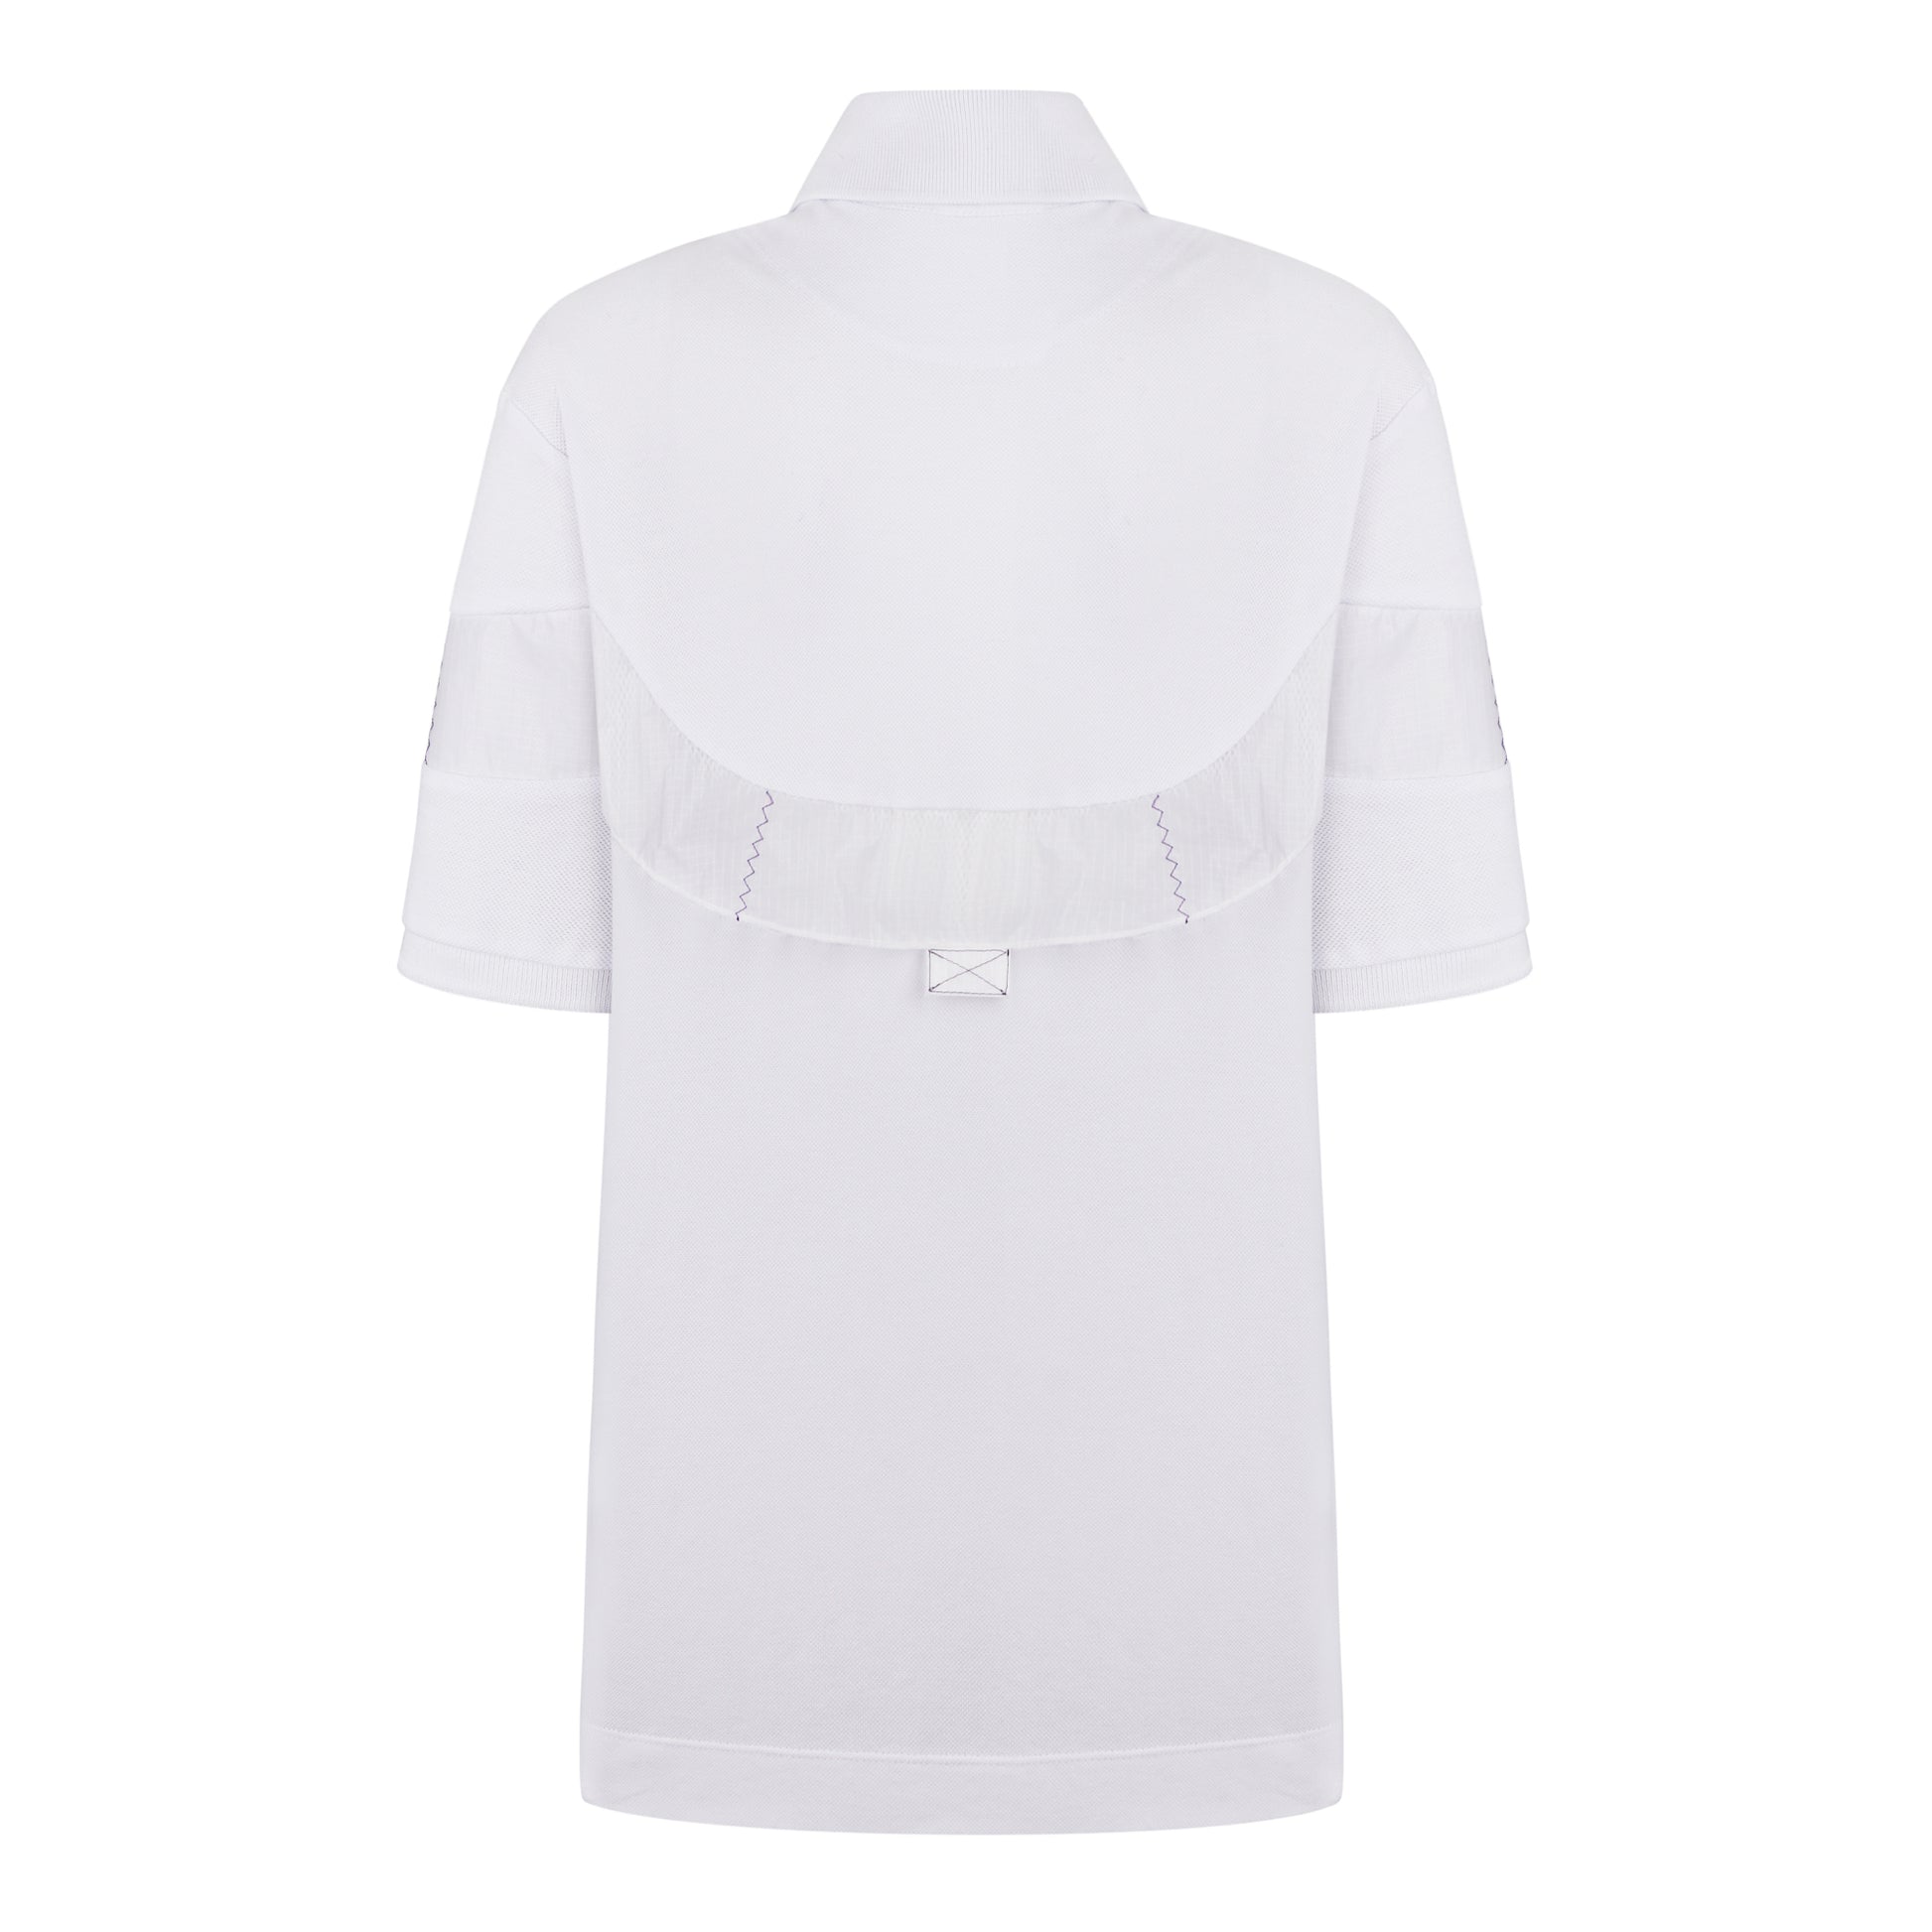 White polo shirt from REwind. Made in Ukraine